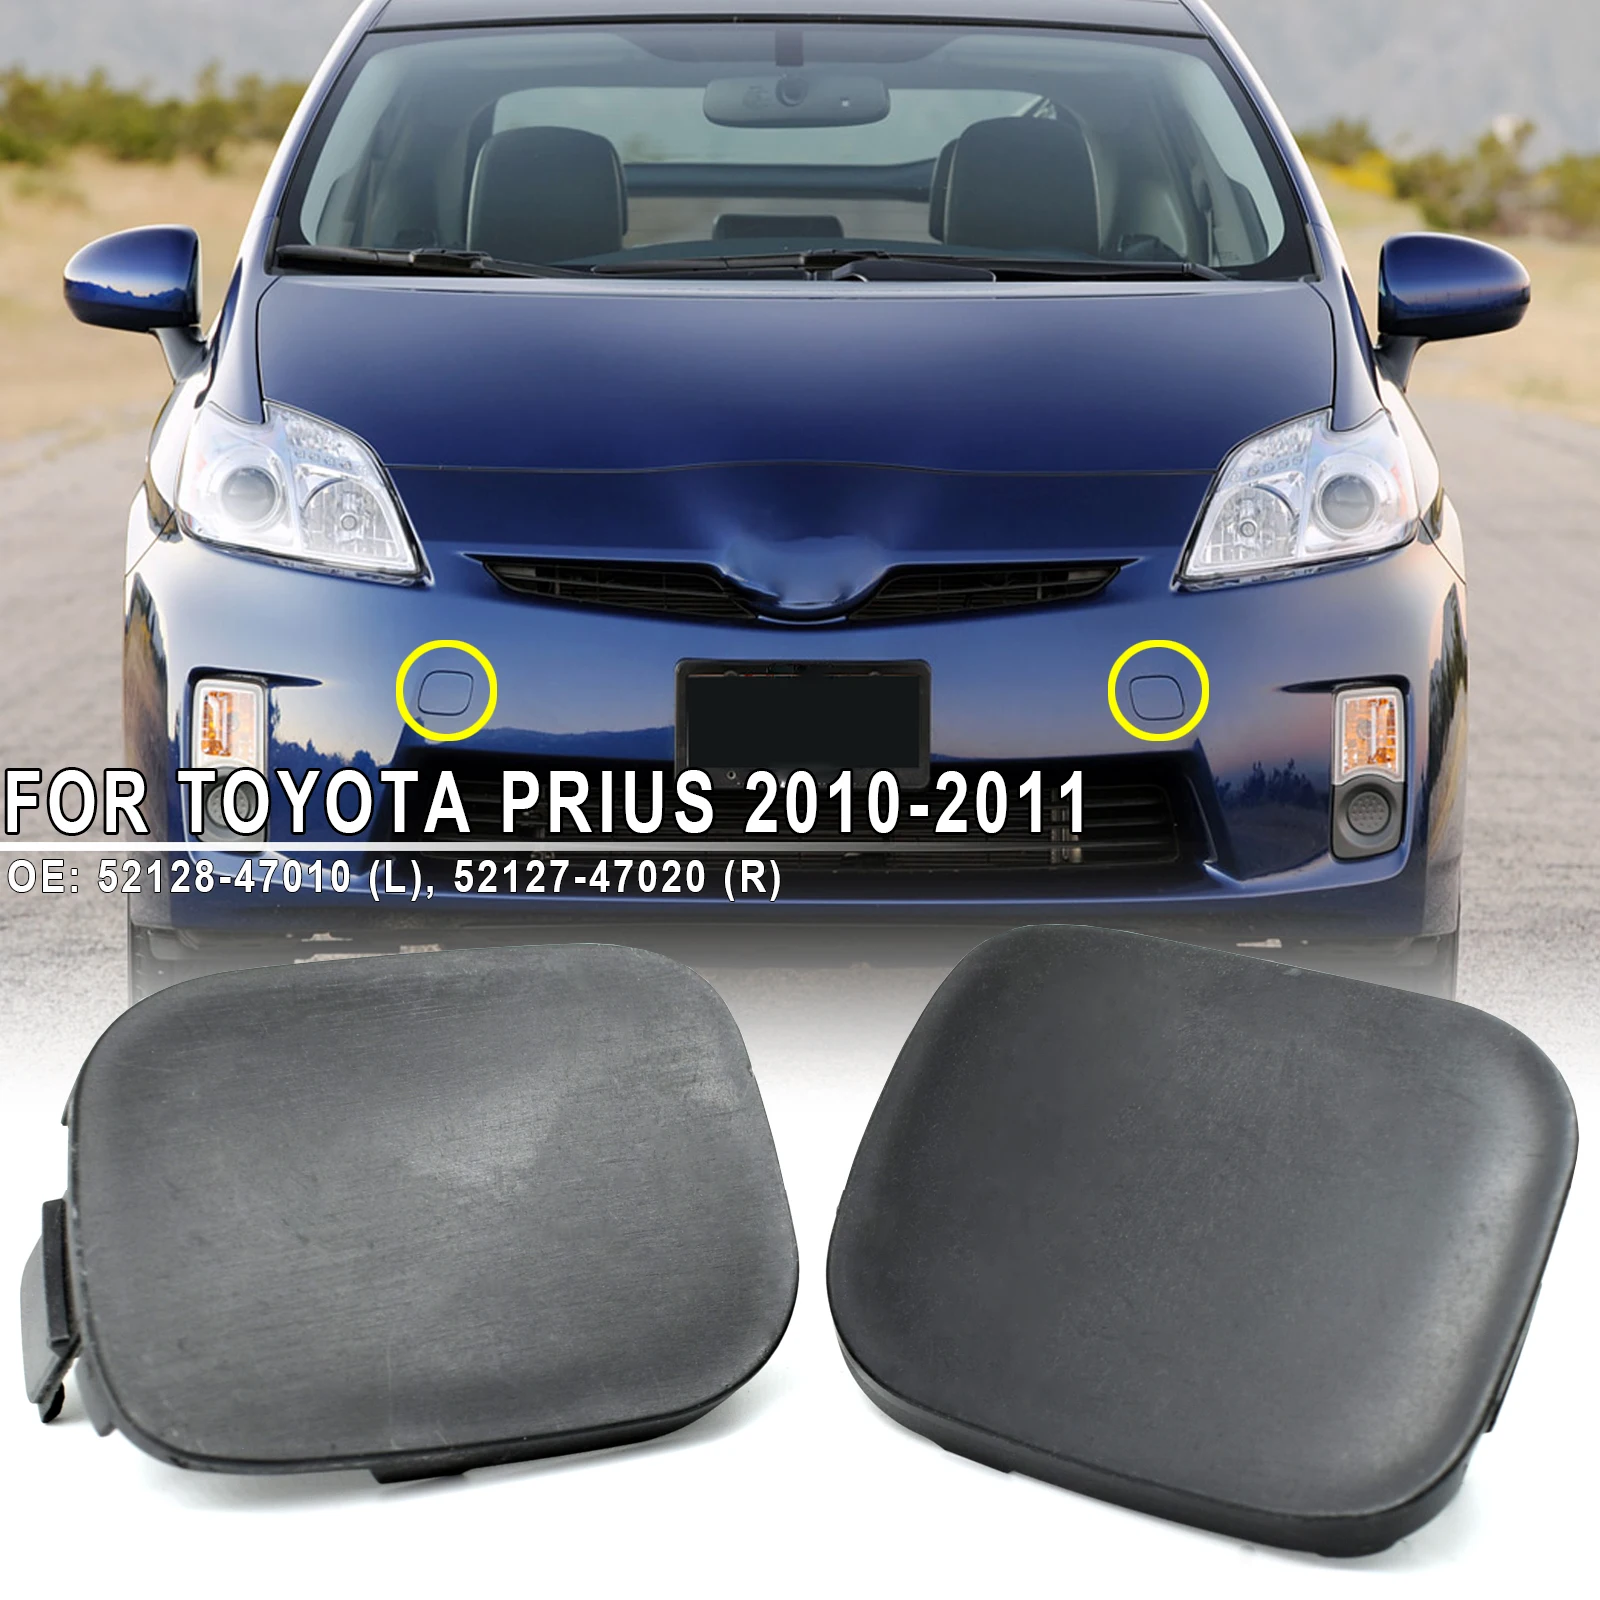 

2pcs For Toyota Prius 2010-2011 Car Tow Hook Eye Cover Towing Trailer Cap Unprimed Black Right Left Caps 52128-47010 52127-47020